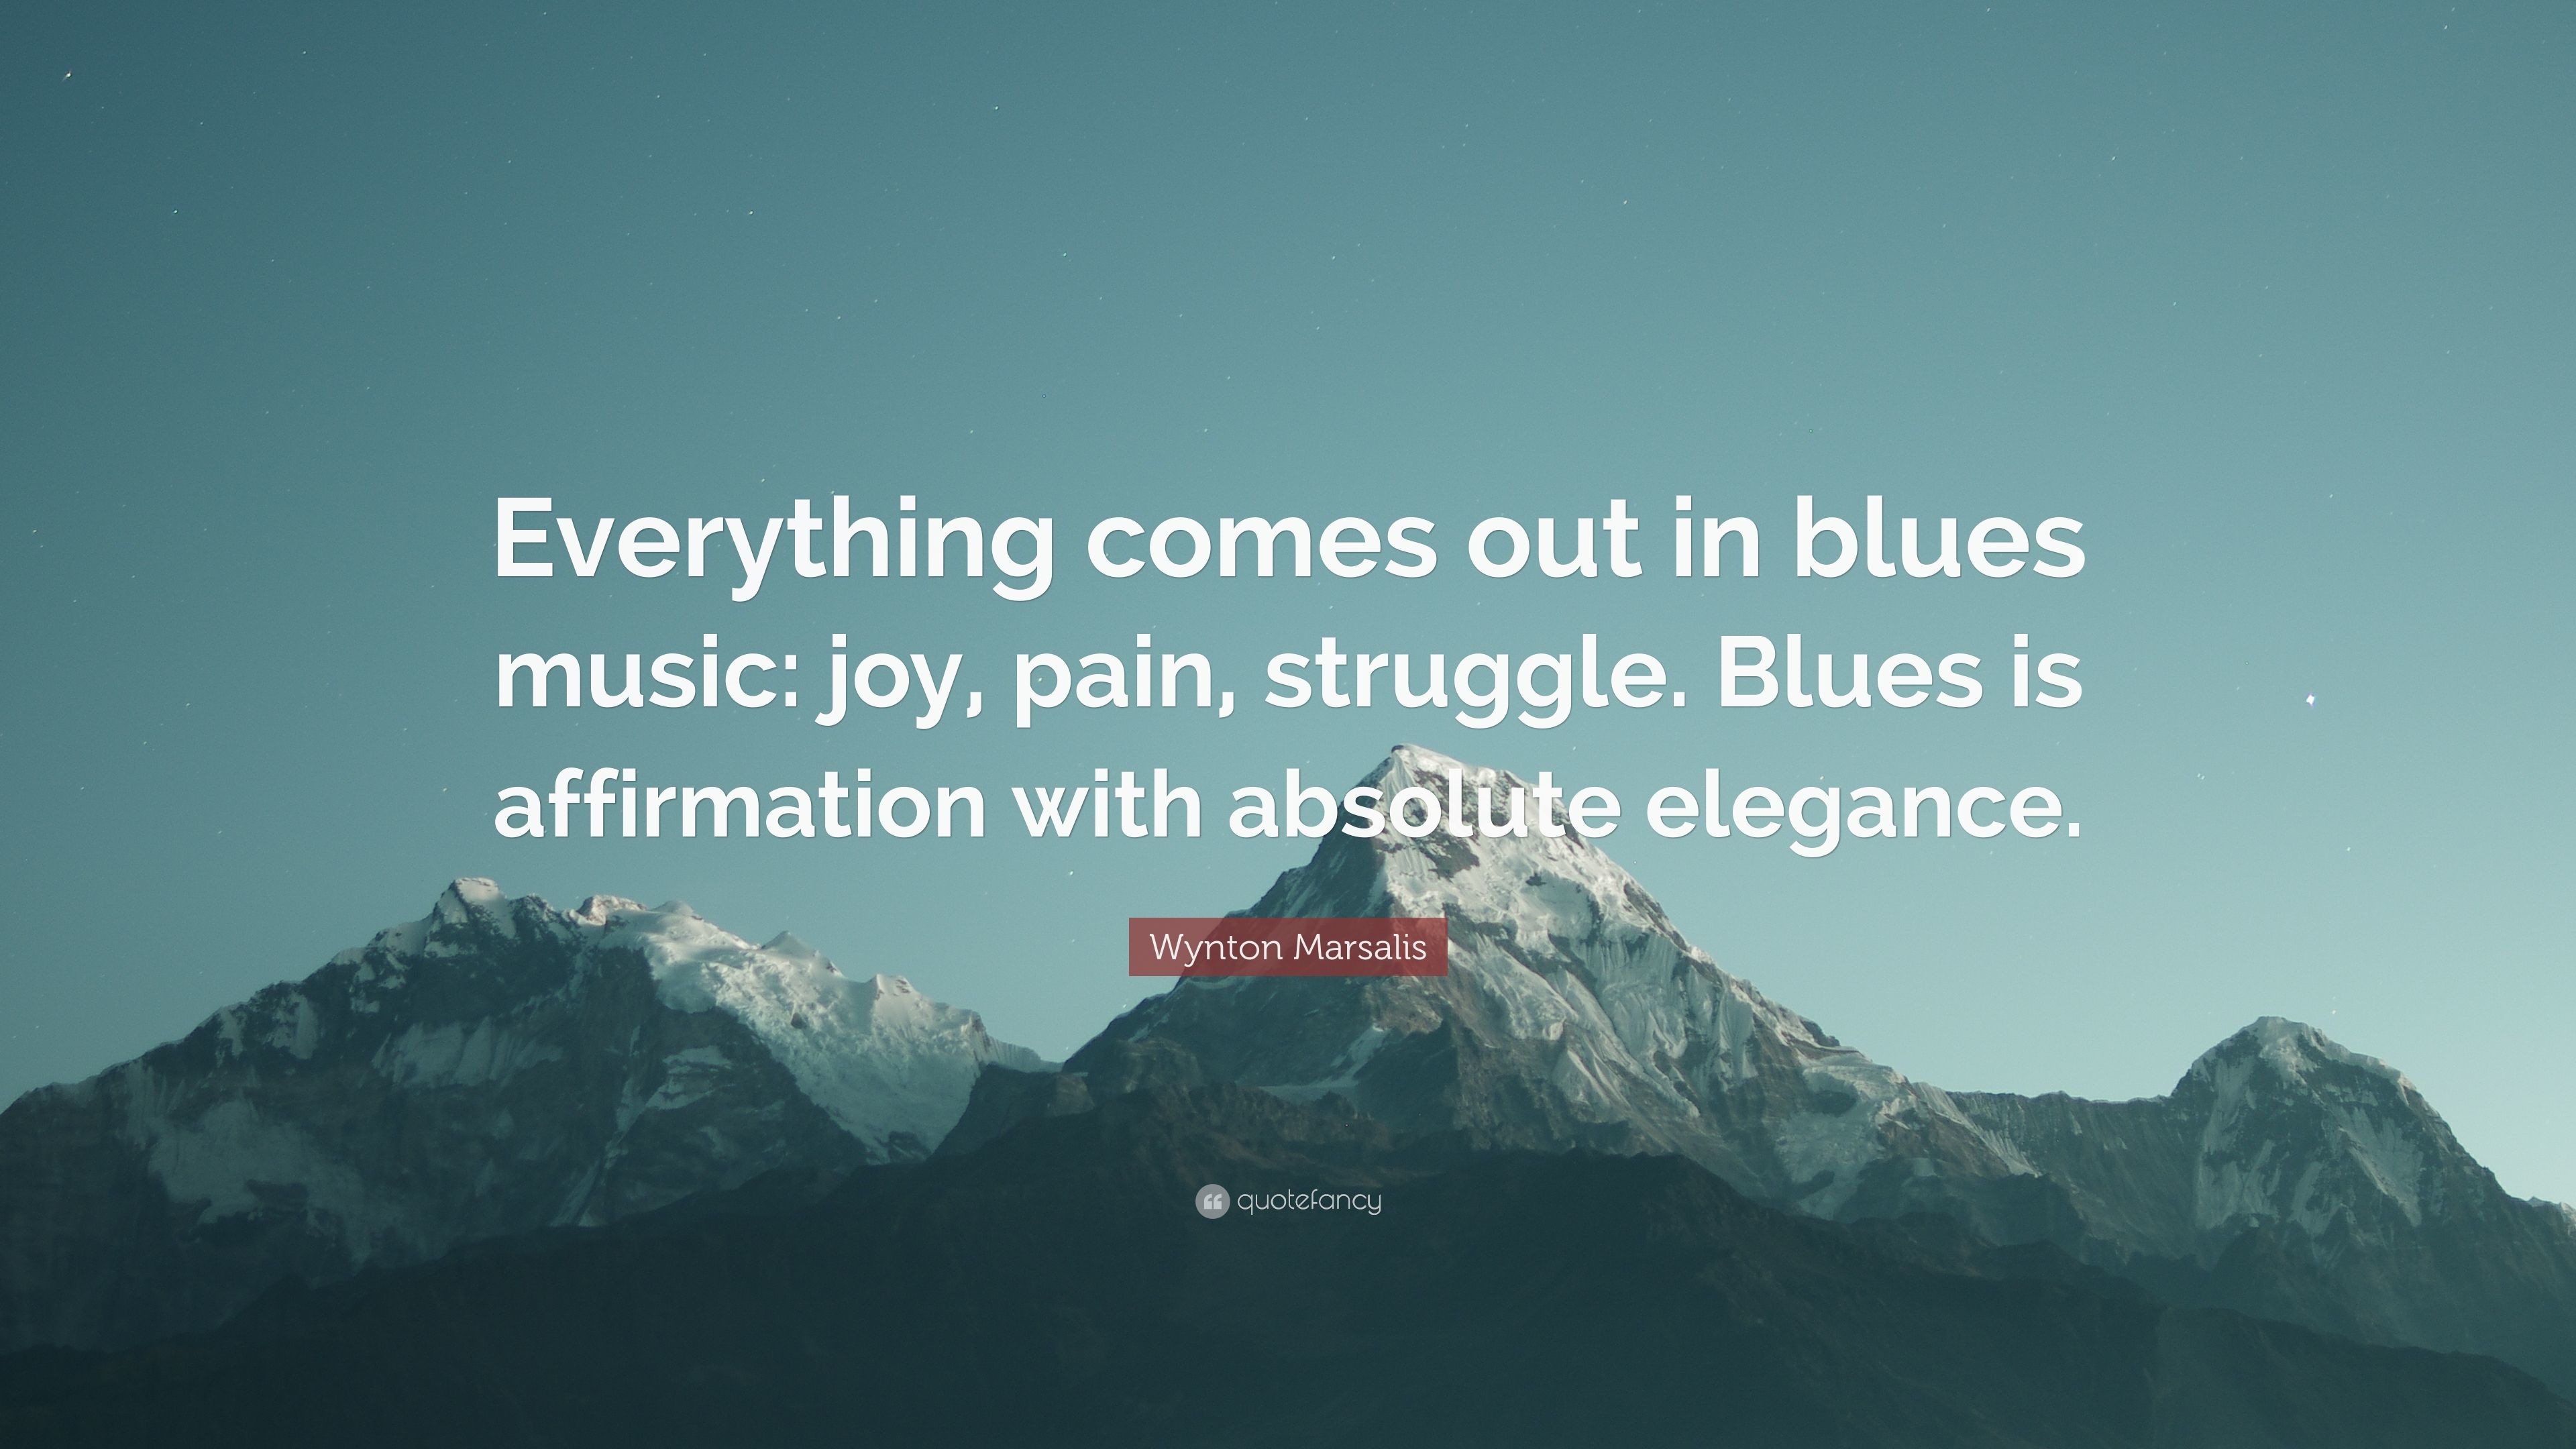 3840x2160 Wynton Marsalis Quote: “Everything comes out in blues music: joy, pain,